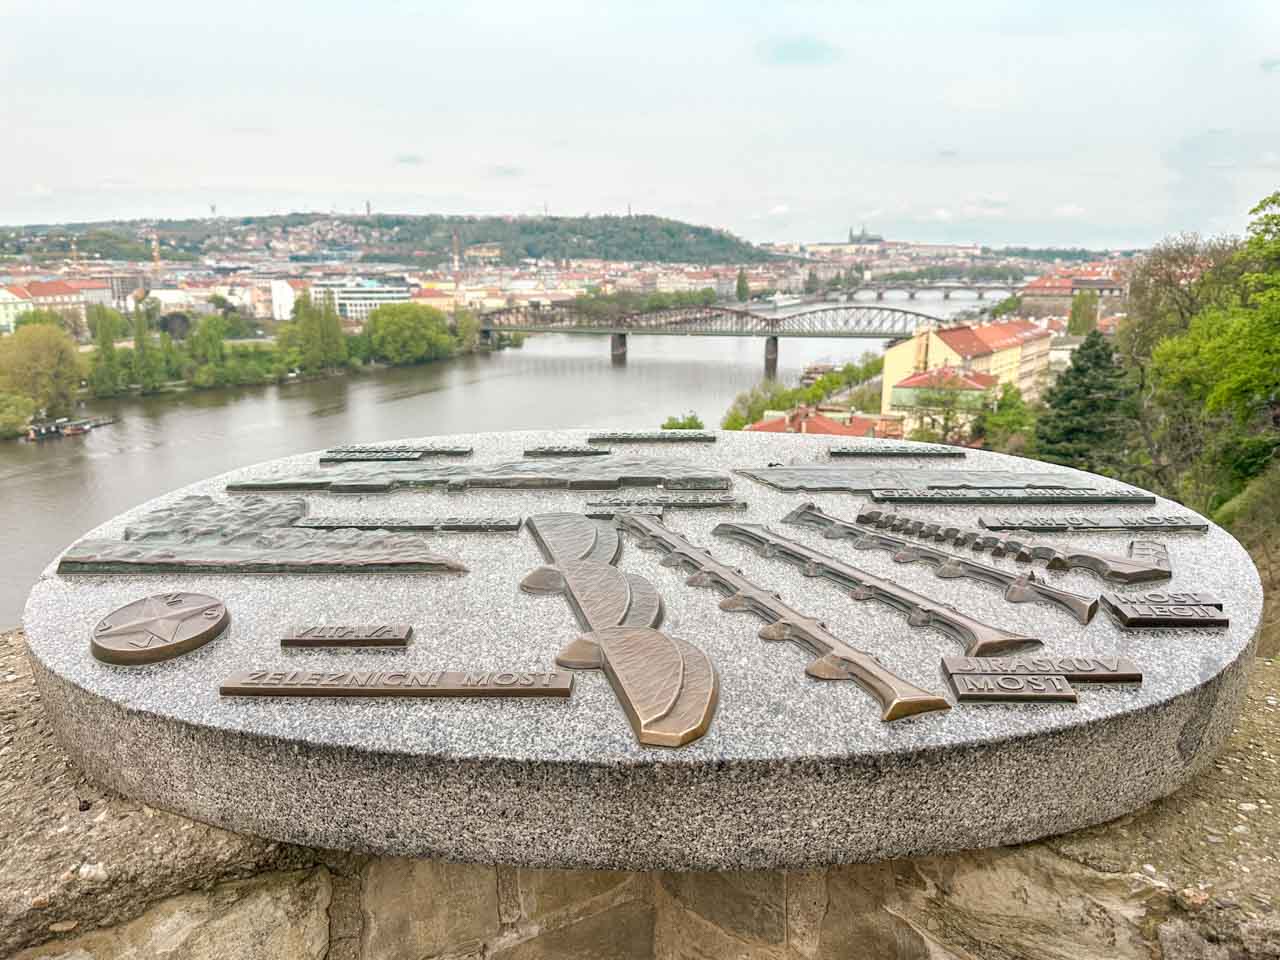 Iron map of Prague in Vyšehrad with Vltava River and Prague Castle seen in the background